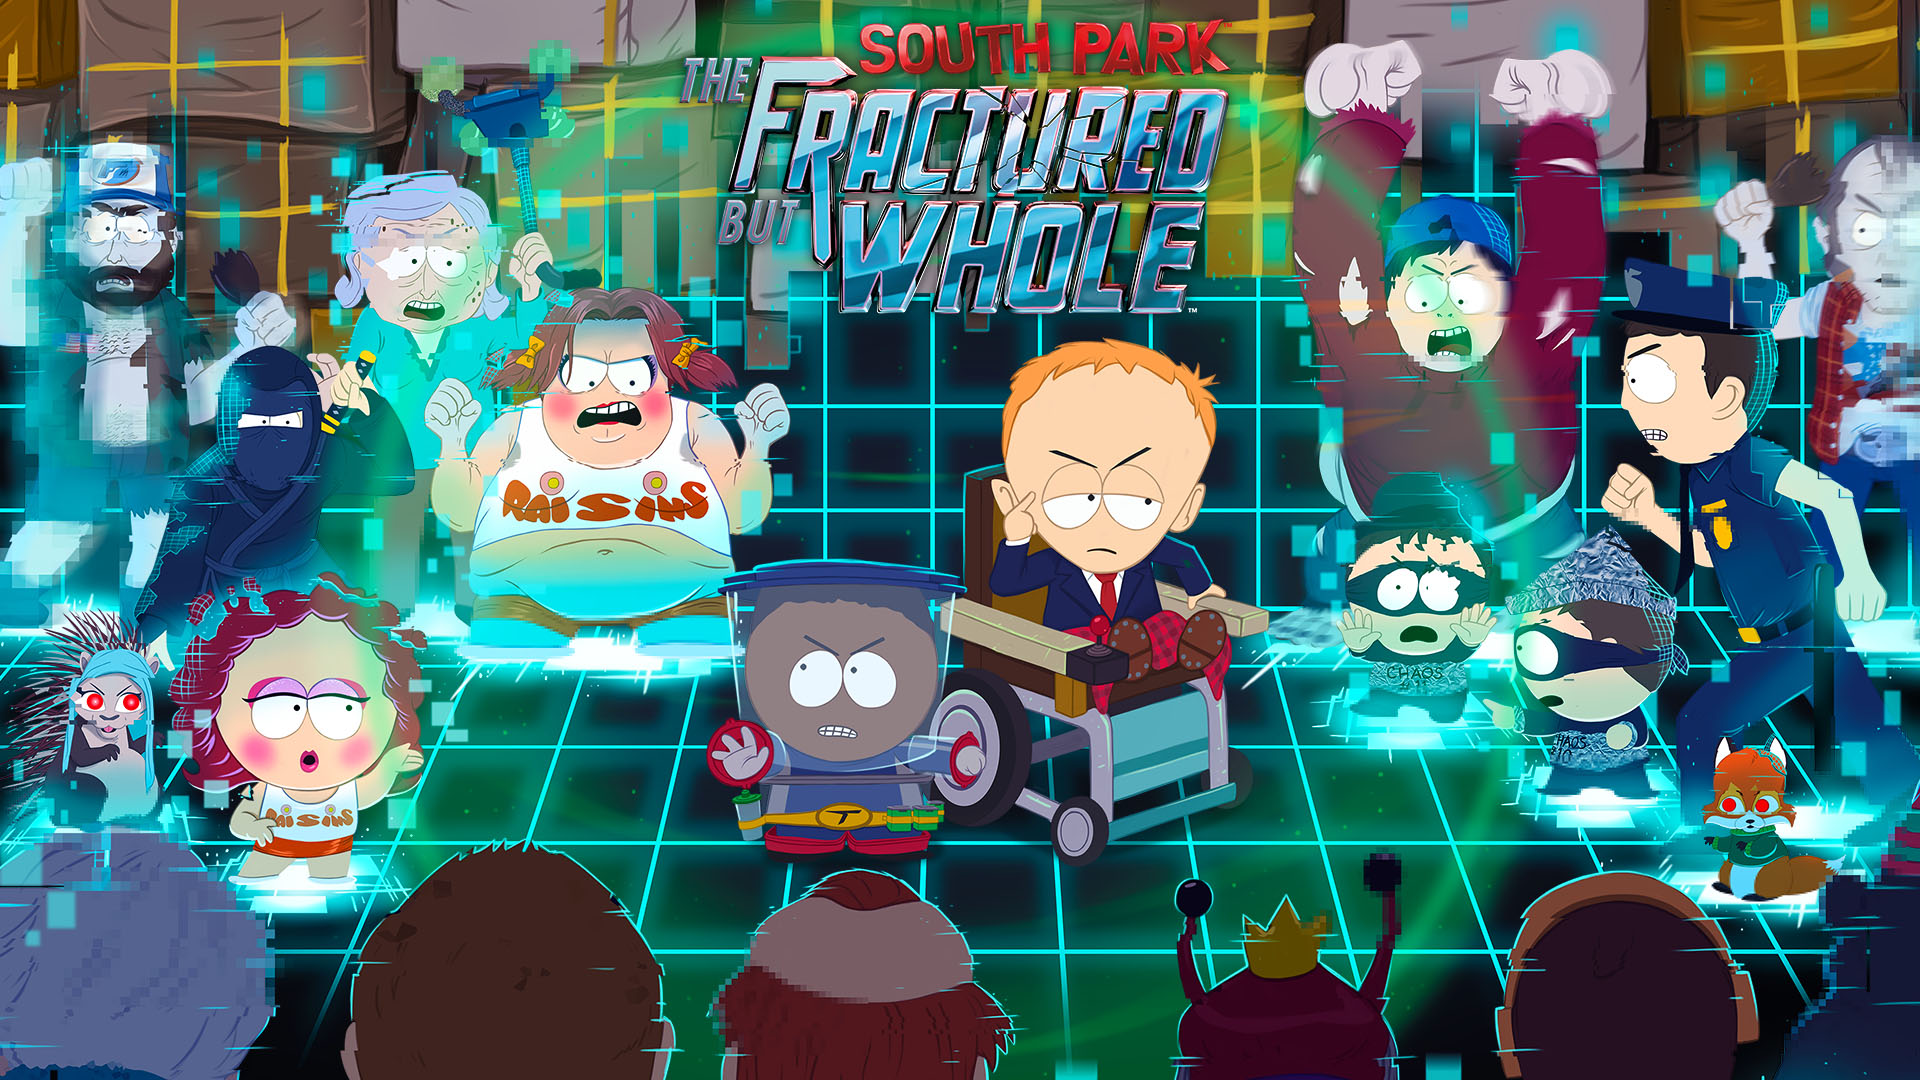 South park the fractured but whole купить ключ steam дешево фото 101